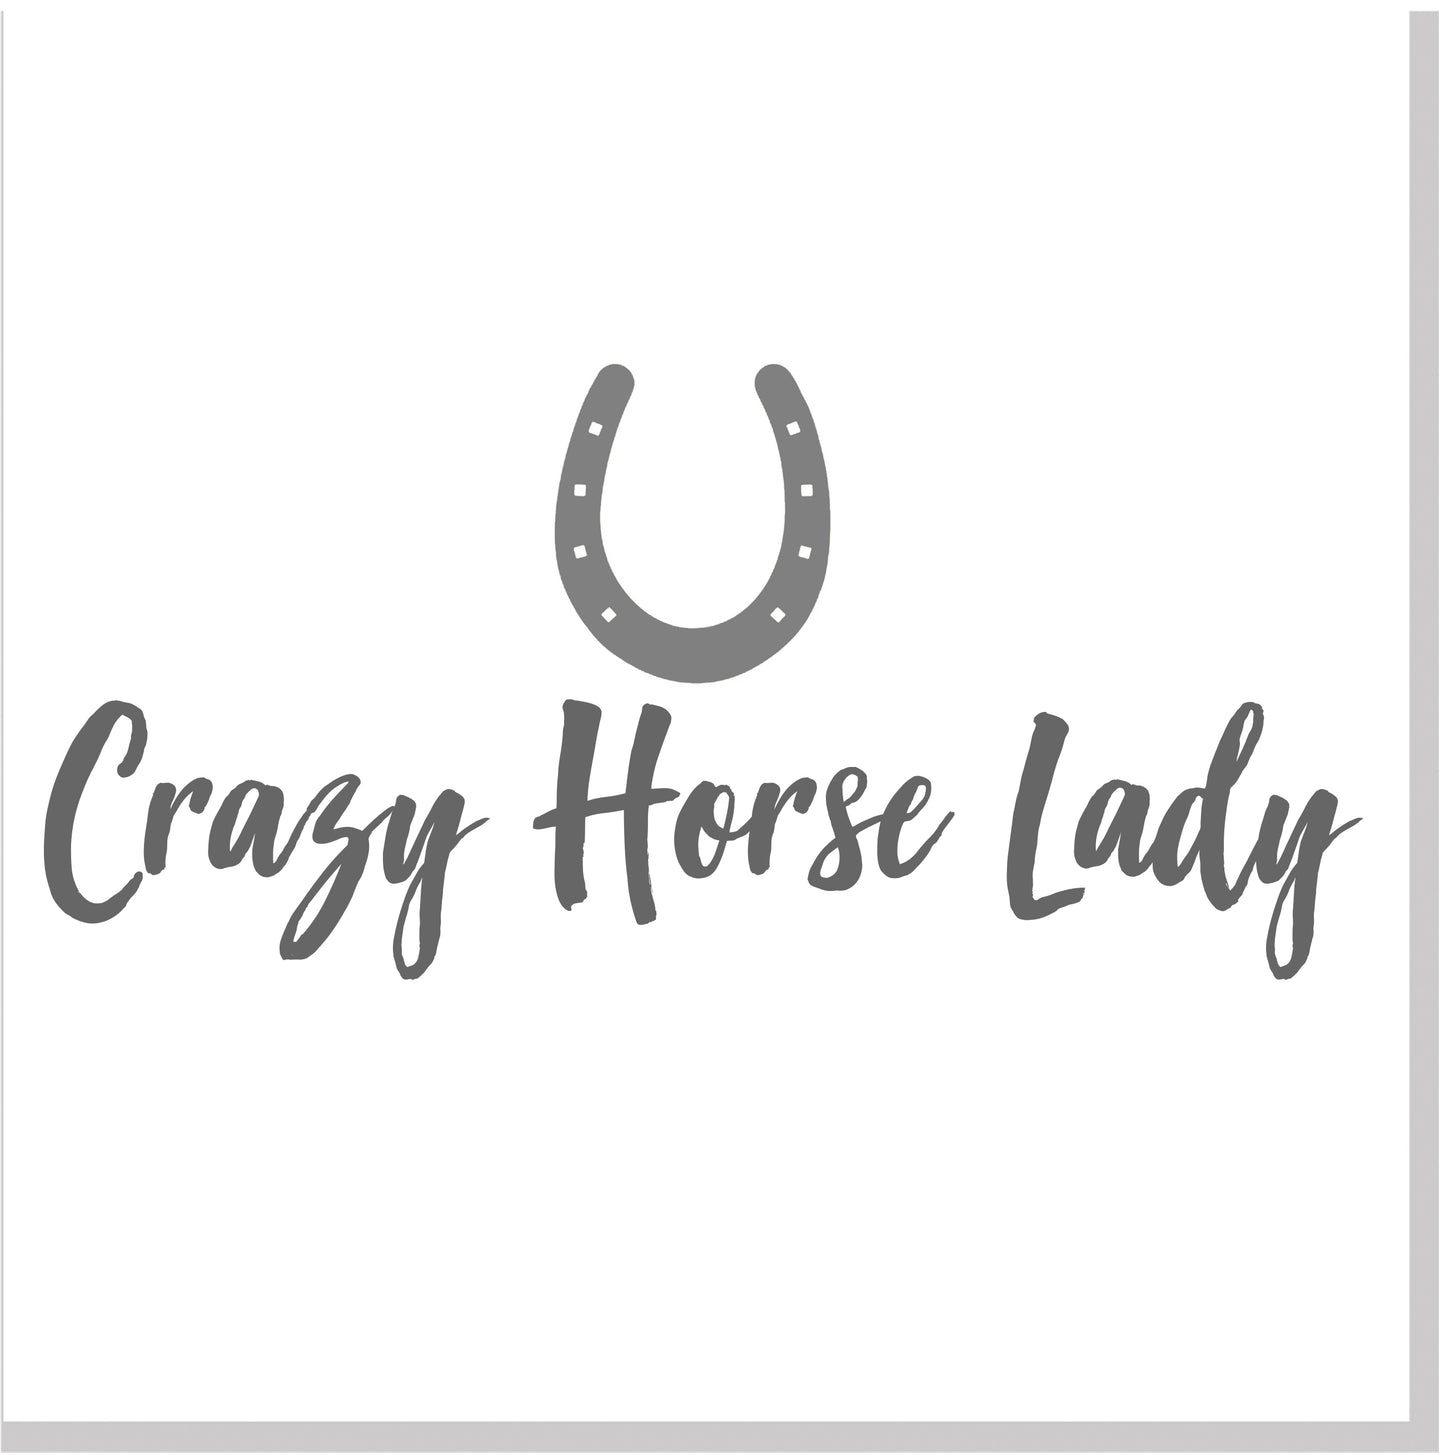 Crazy Horse lady square card